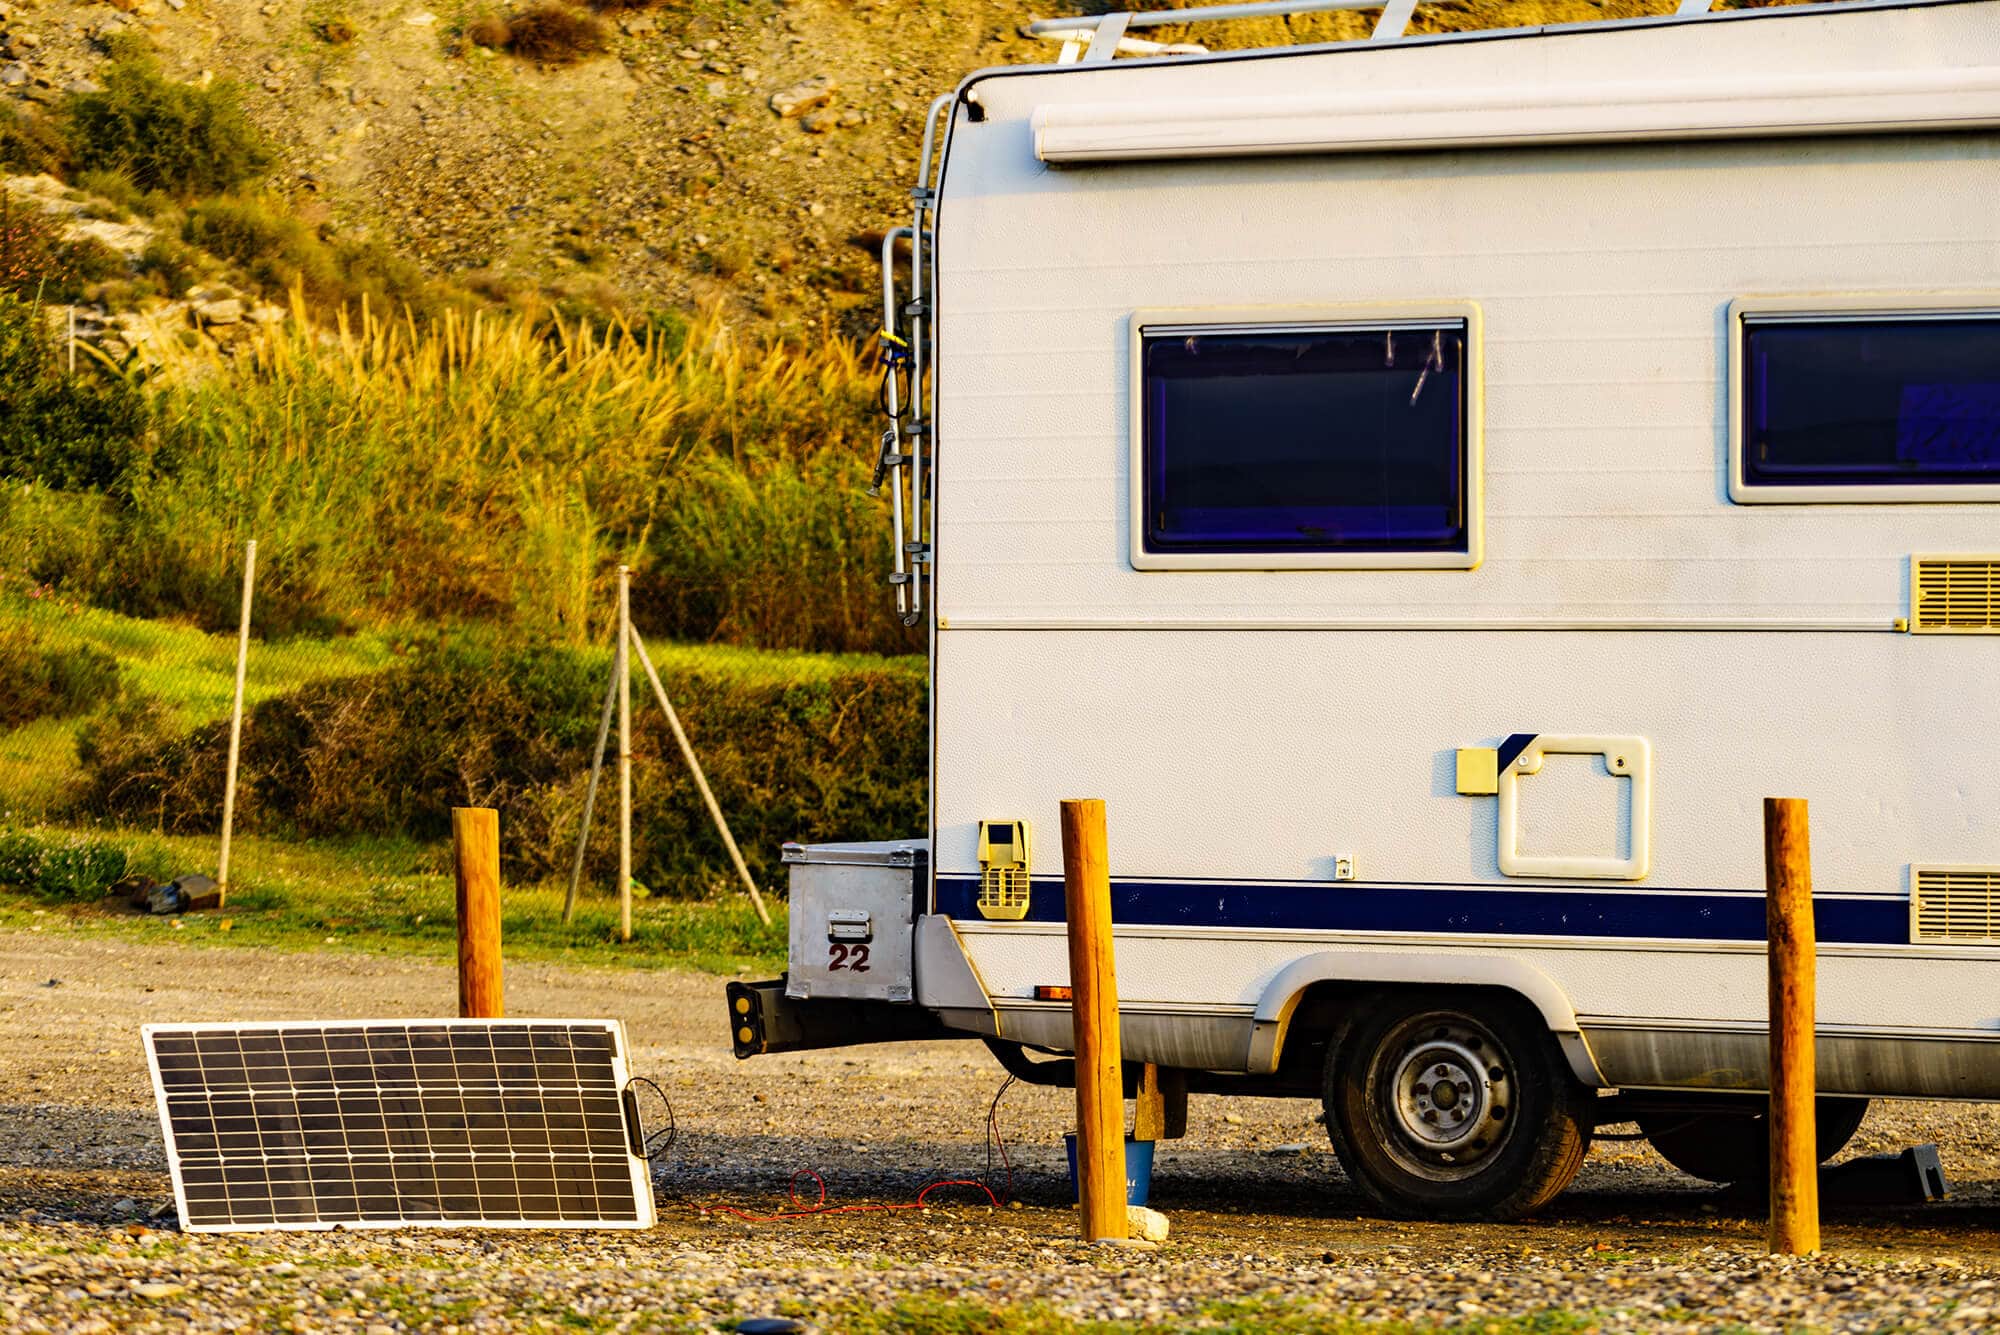 Charging a trailer or campervan batter example with solar